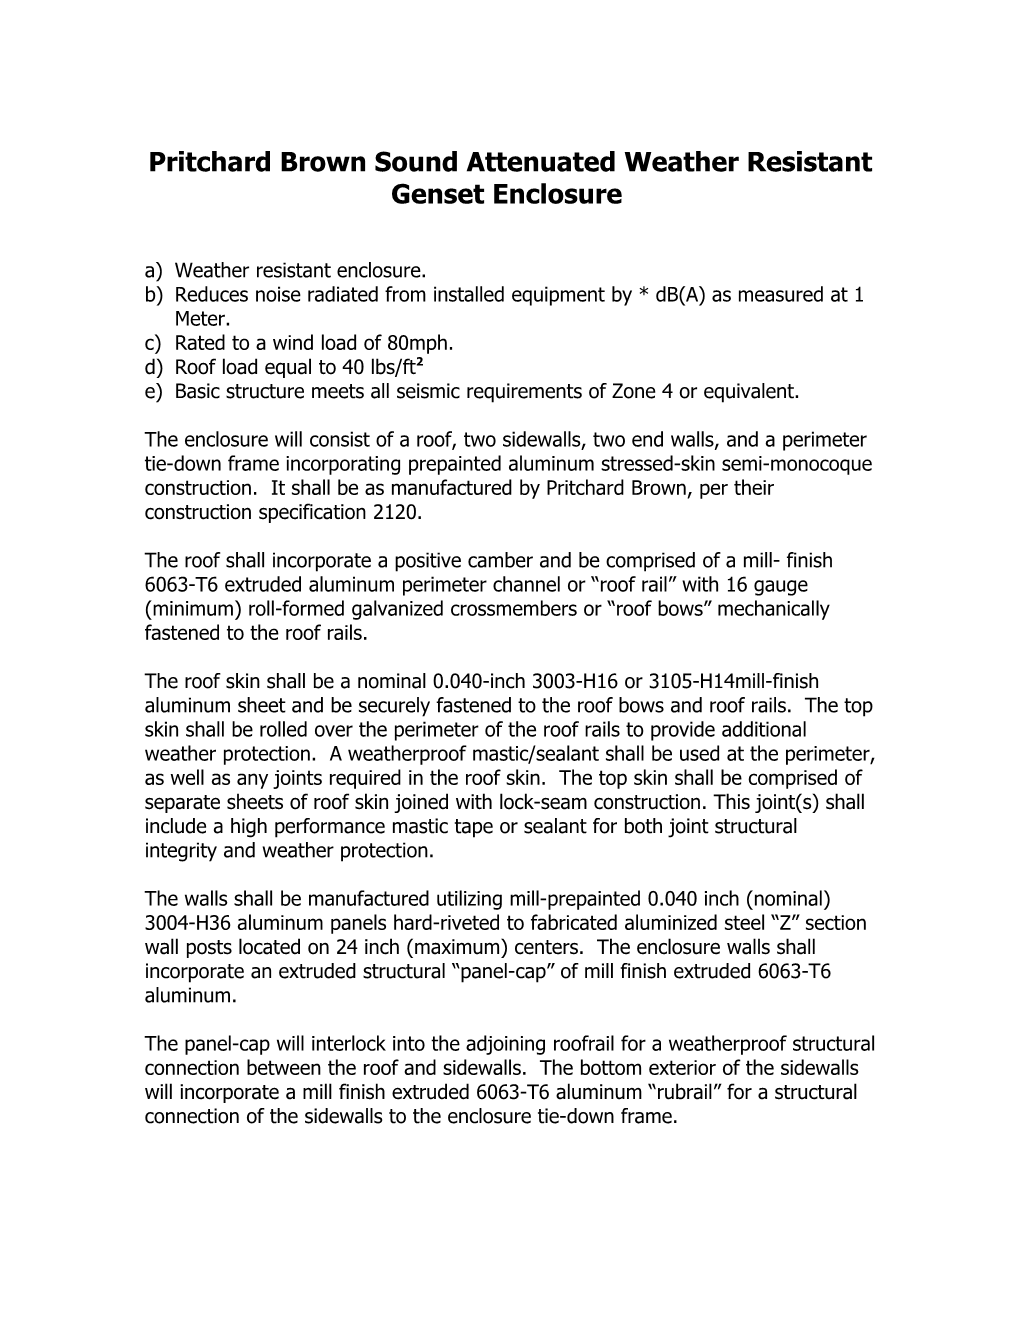 Pritchard Brown Sound Attenuated Weather Resistant Genset Enclosure